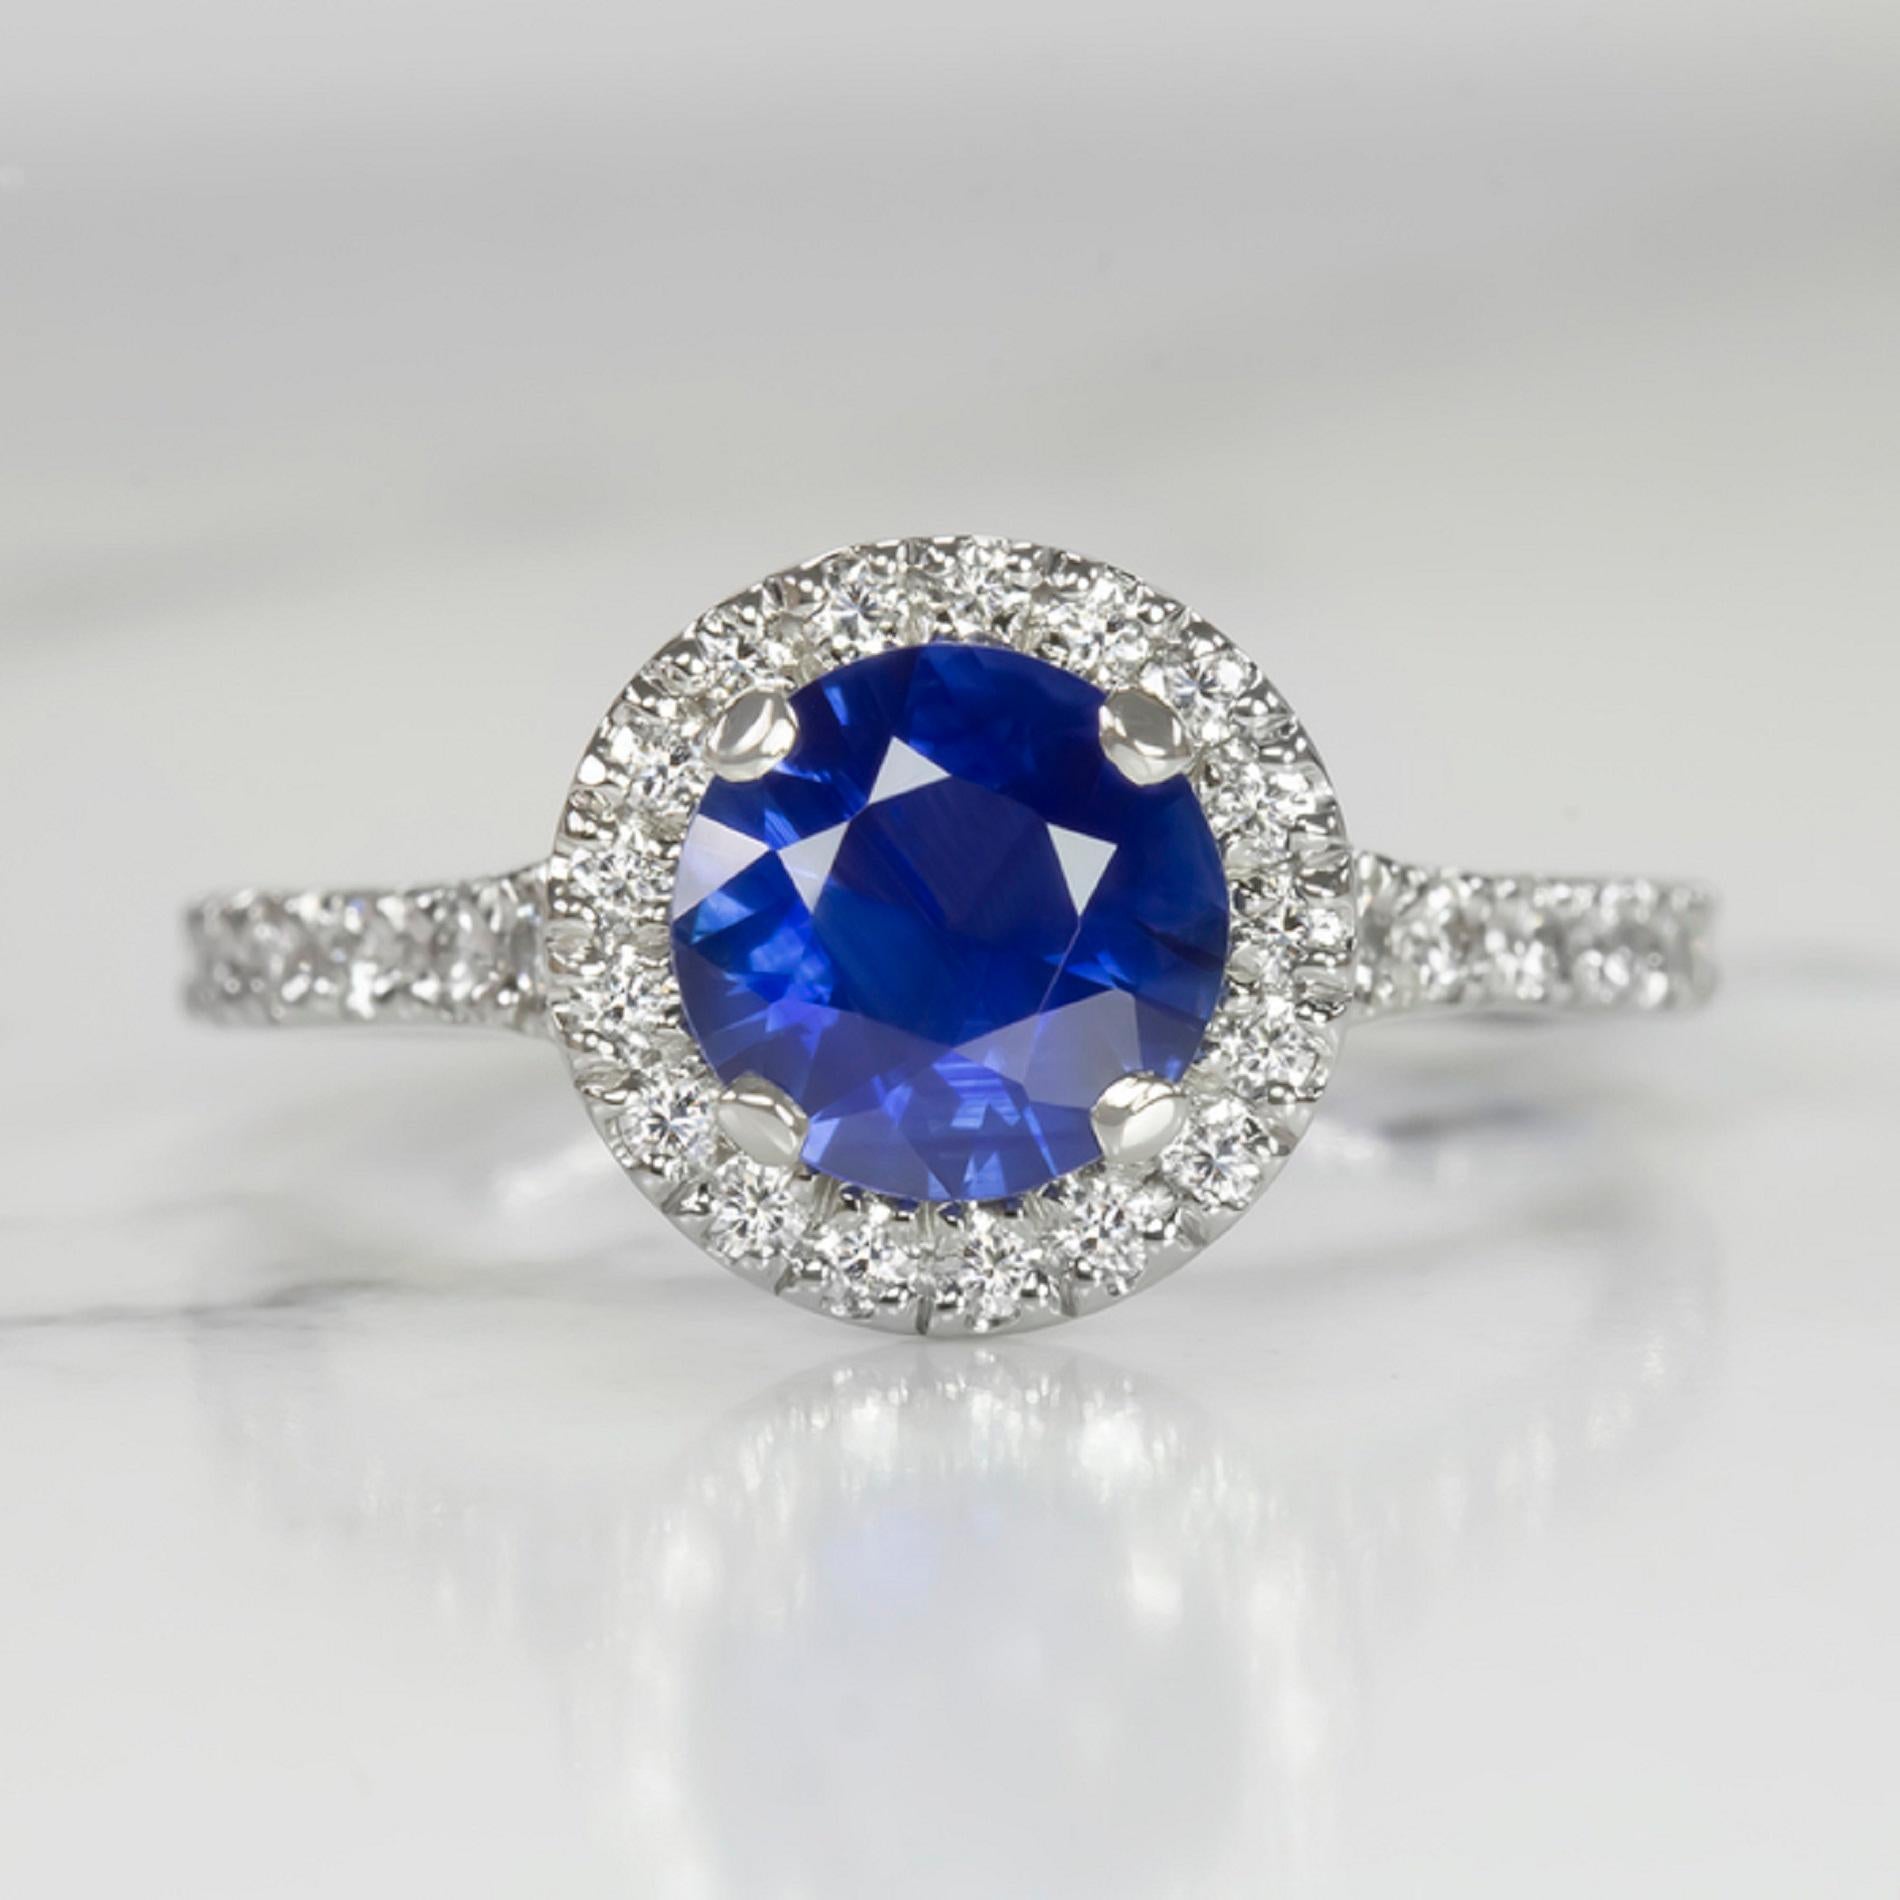 high quality sapphire and diamond ring has an eye catching, glamorous design featuring a royal blue sapphire in a luxurious, diamond encrusted platinum setting! The 1.14ct round cut sapphire center is a gorgeous royal blue color. It is a beautiful